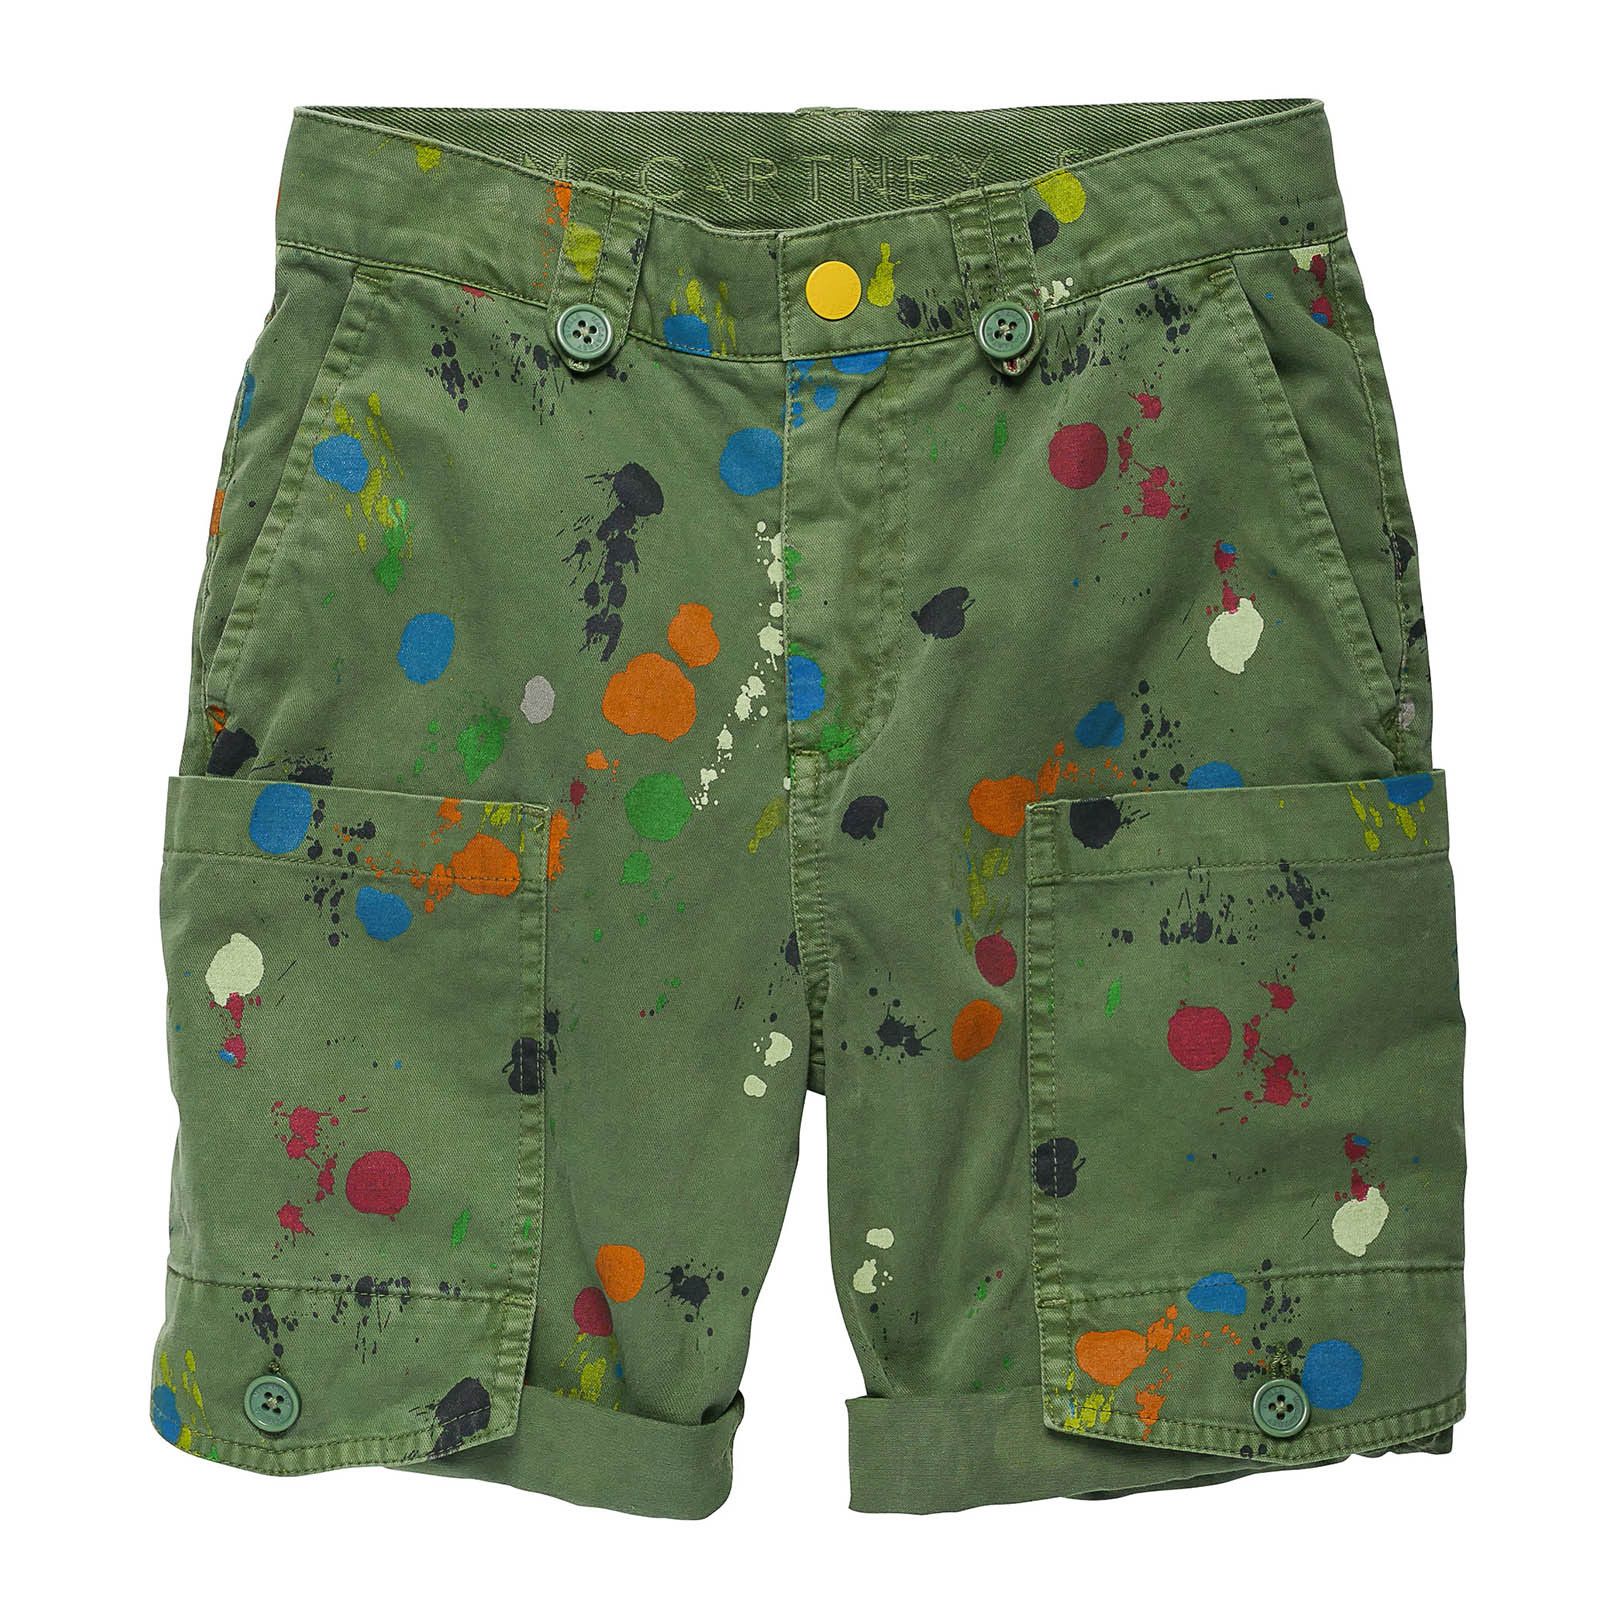 Boys Green Cotton Spot Printed Shorts With Patch Pockets - CÉMAROSE | Children's Fashion Store